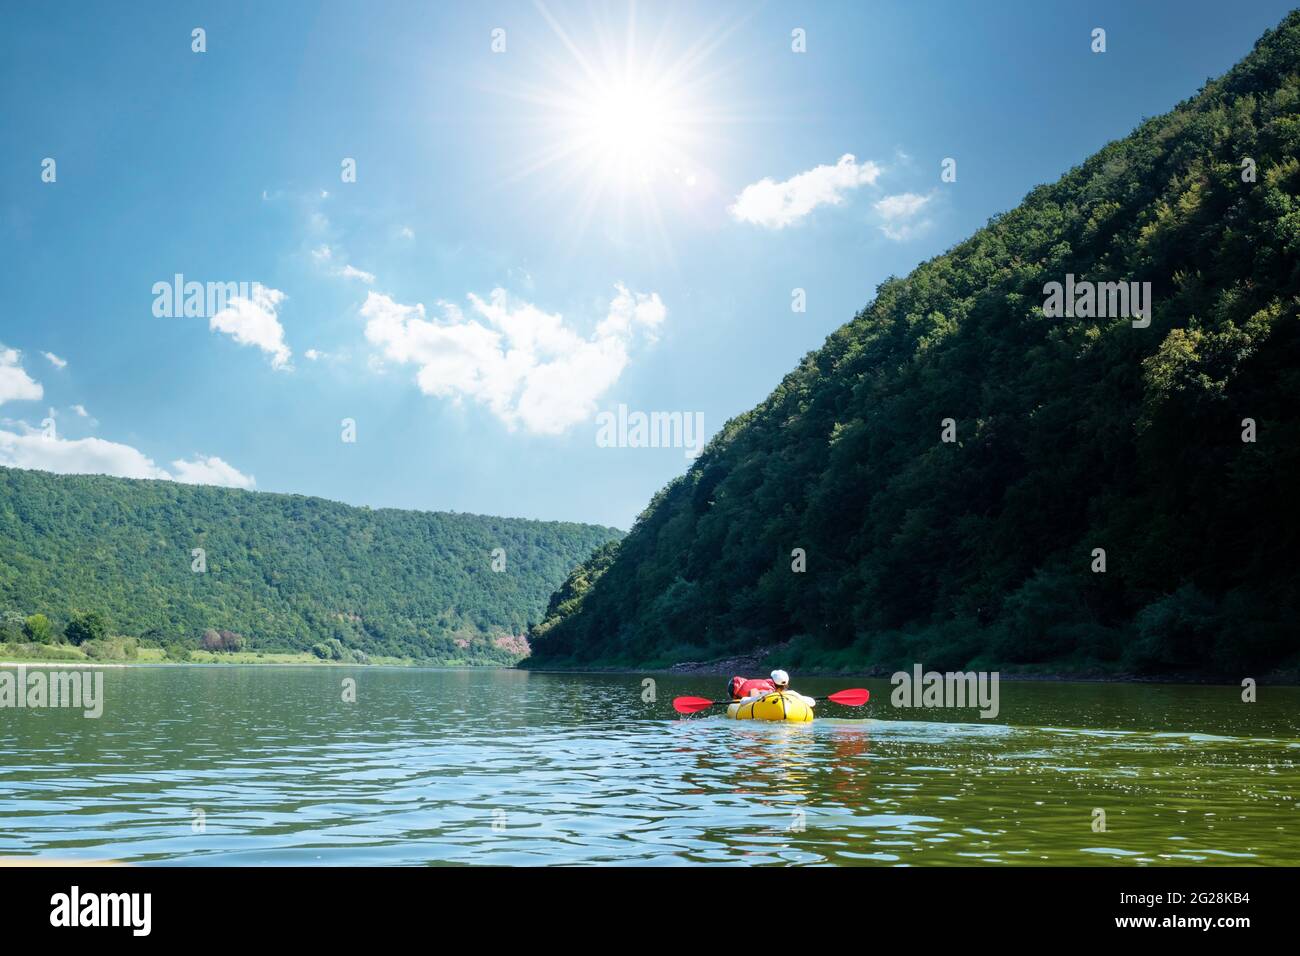 Tourist on yellow packraft rubber boat with red padle on a sunrise river. Packrafting. Active lifestile concept Stock Photo